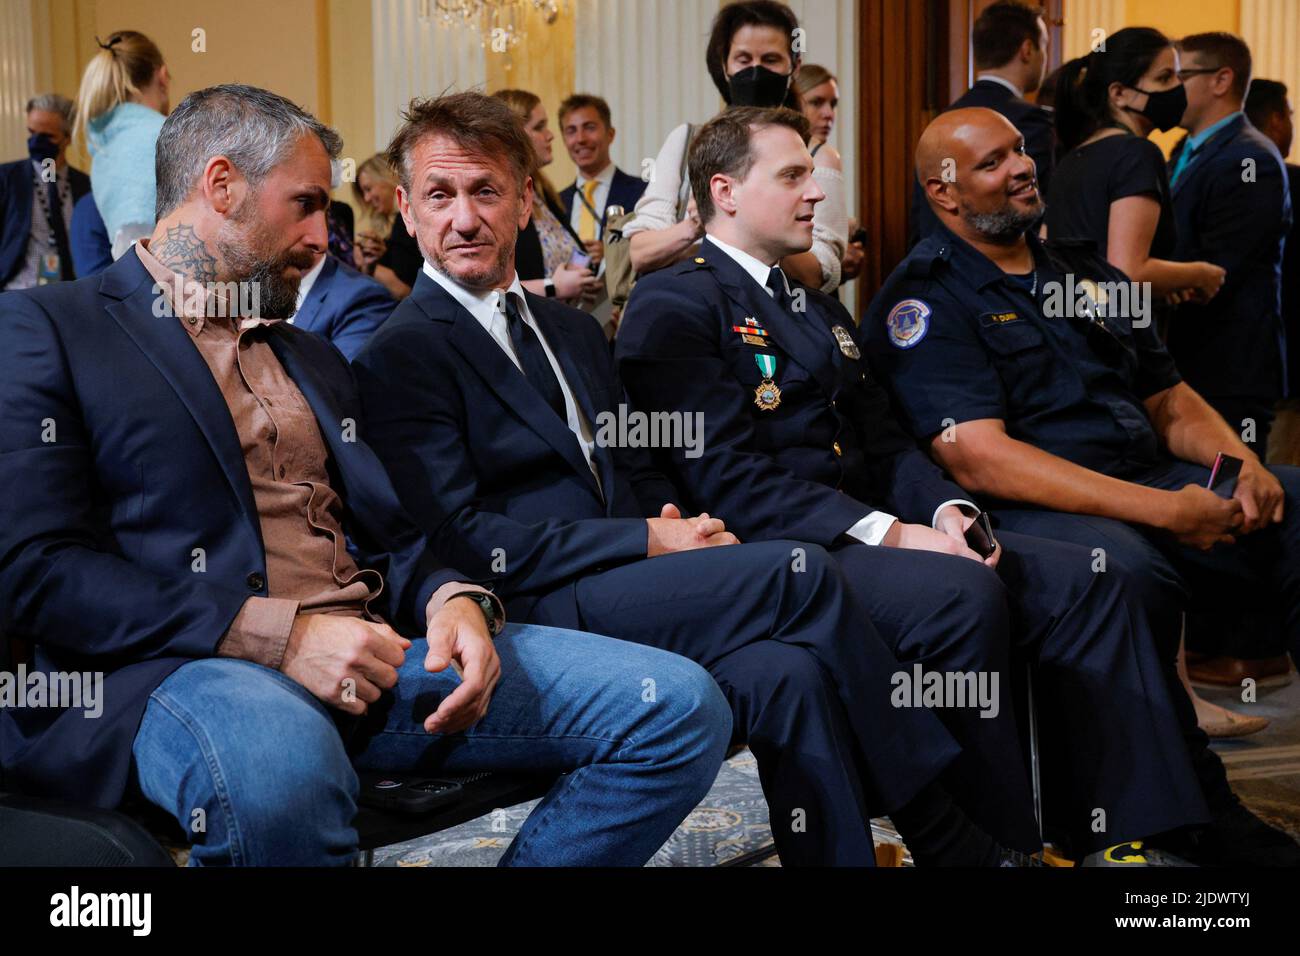 Actor Sean Penn sits with former Washington police officer Michael Fanone, Metropolitan police officer Daniel Hodges and Metropolitan police officer Harry Dunn, all of whom were assaulted during the January 6, 2021 attack on the U.S. Capitol, during the fifth public hearing of the U.S. House Select Committee to Investigate the event, on Capitol Hill in Washington, U.S., June 23, 2022. REUTERS/Jim Bourg Stock Photo